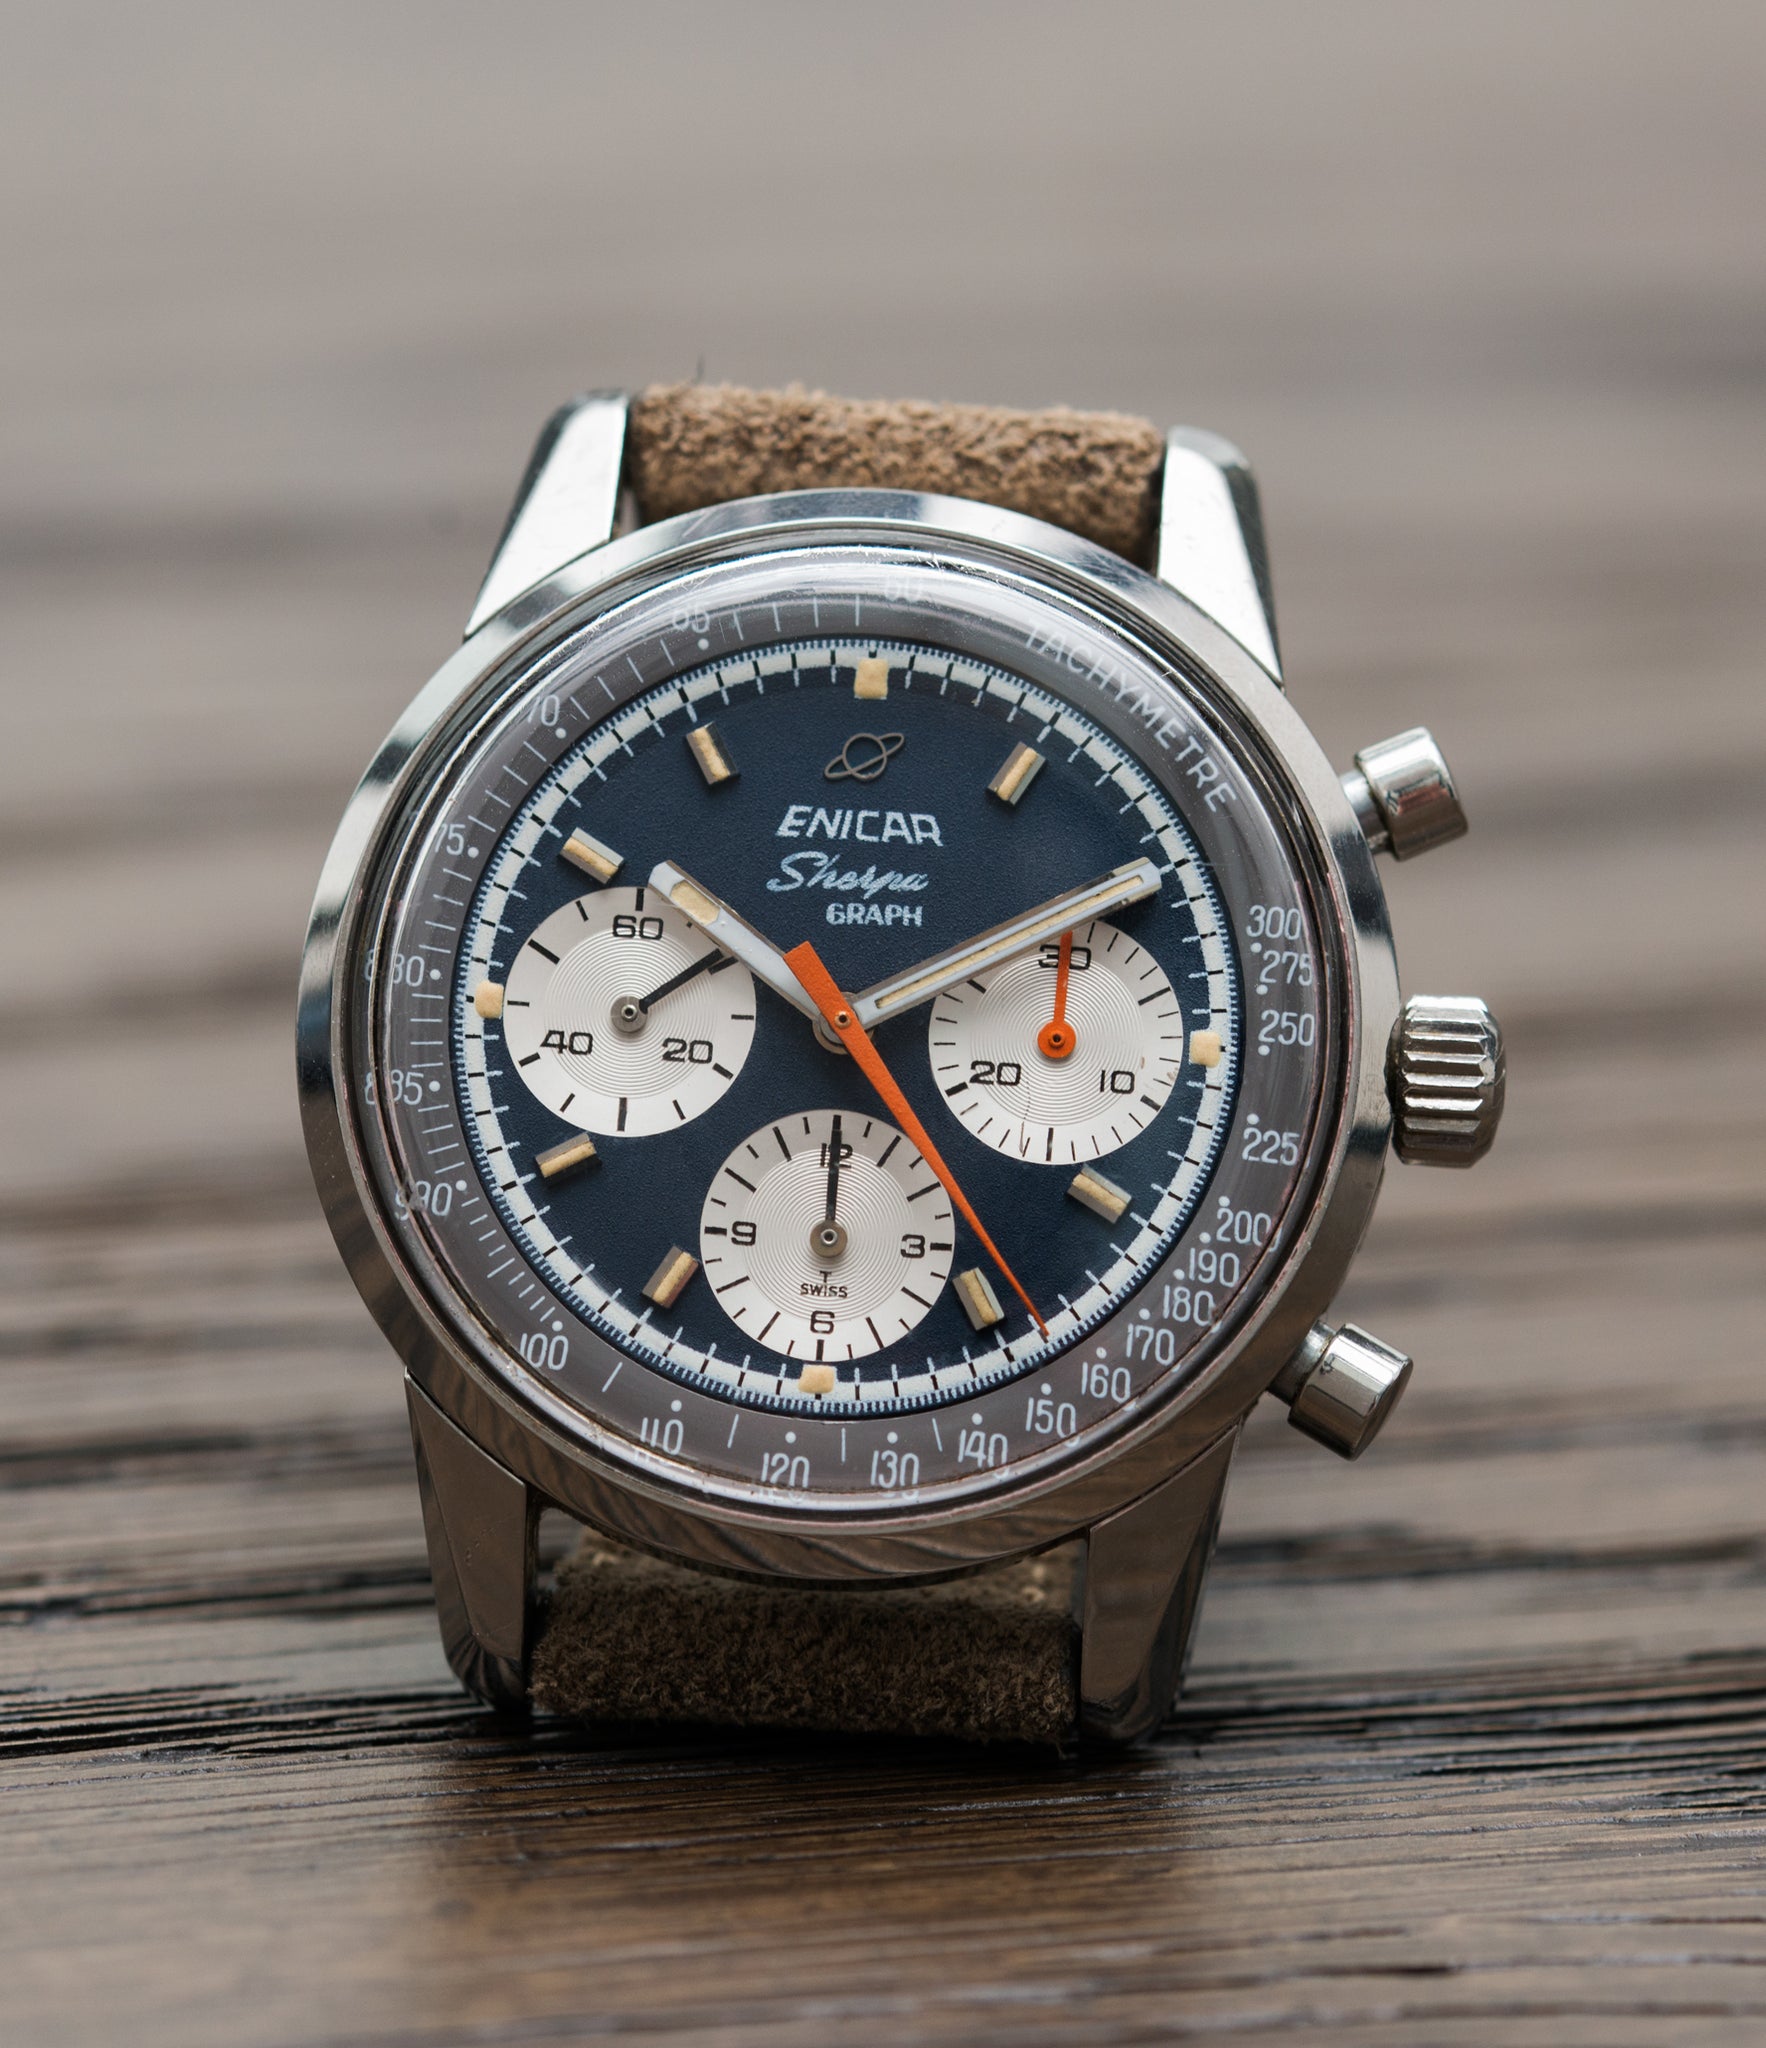 selling Enicar Sherpa Graph 300 Ref. 072-02-01 vintage steel chronograph sport racing watch for sale online at A Collected Man London UK vintage watch specialist